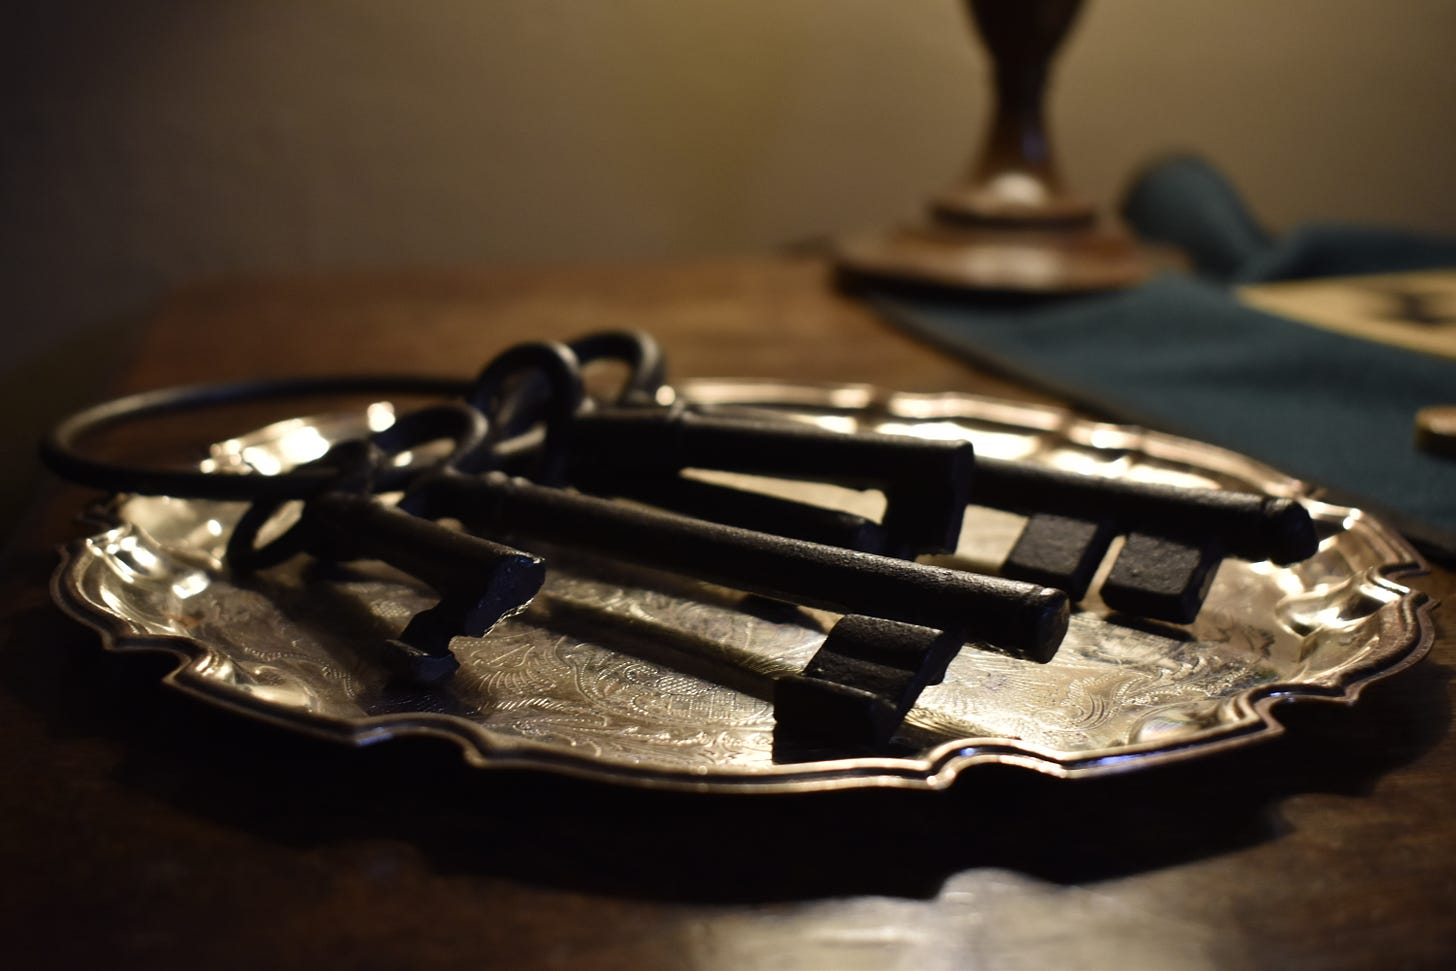 Four large iron keys rest on an ornate silver tray